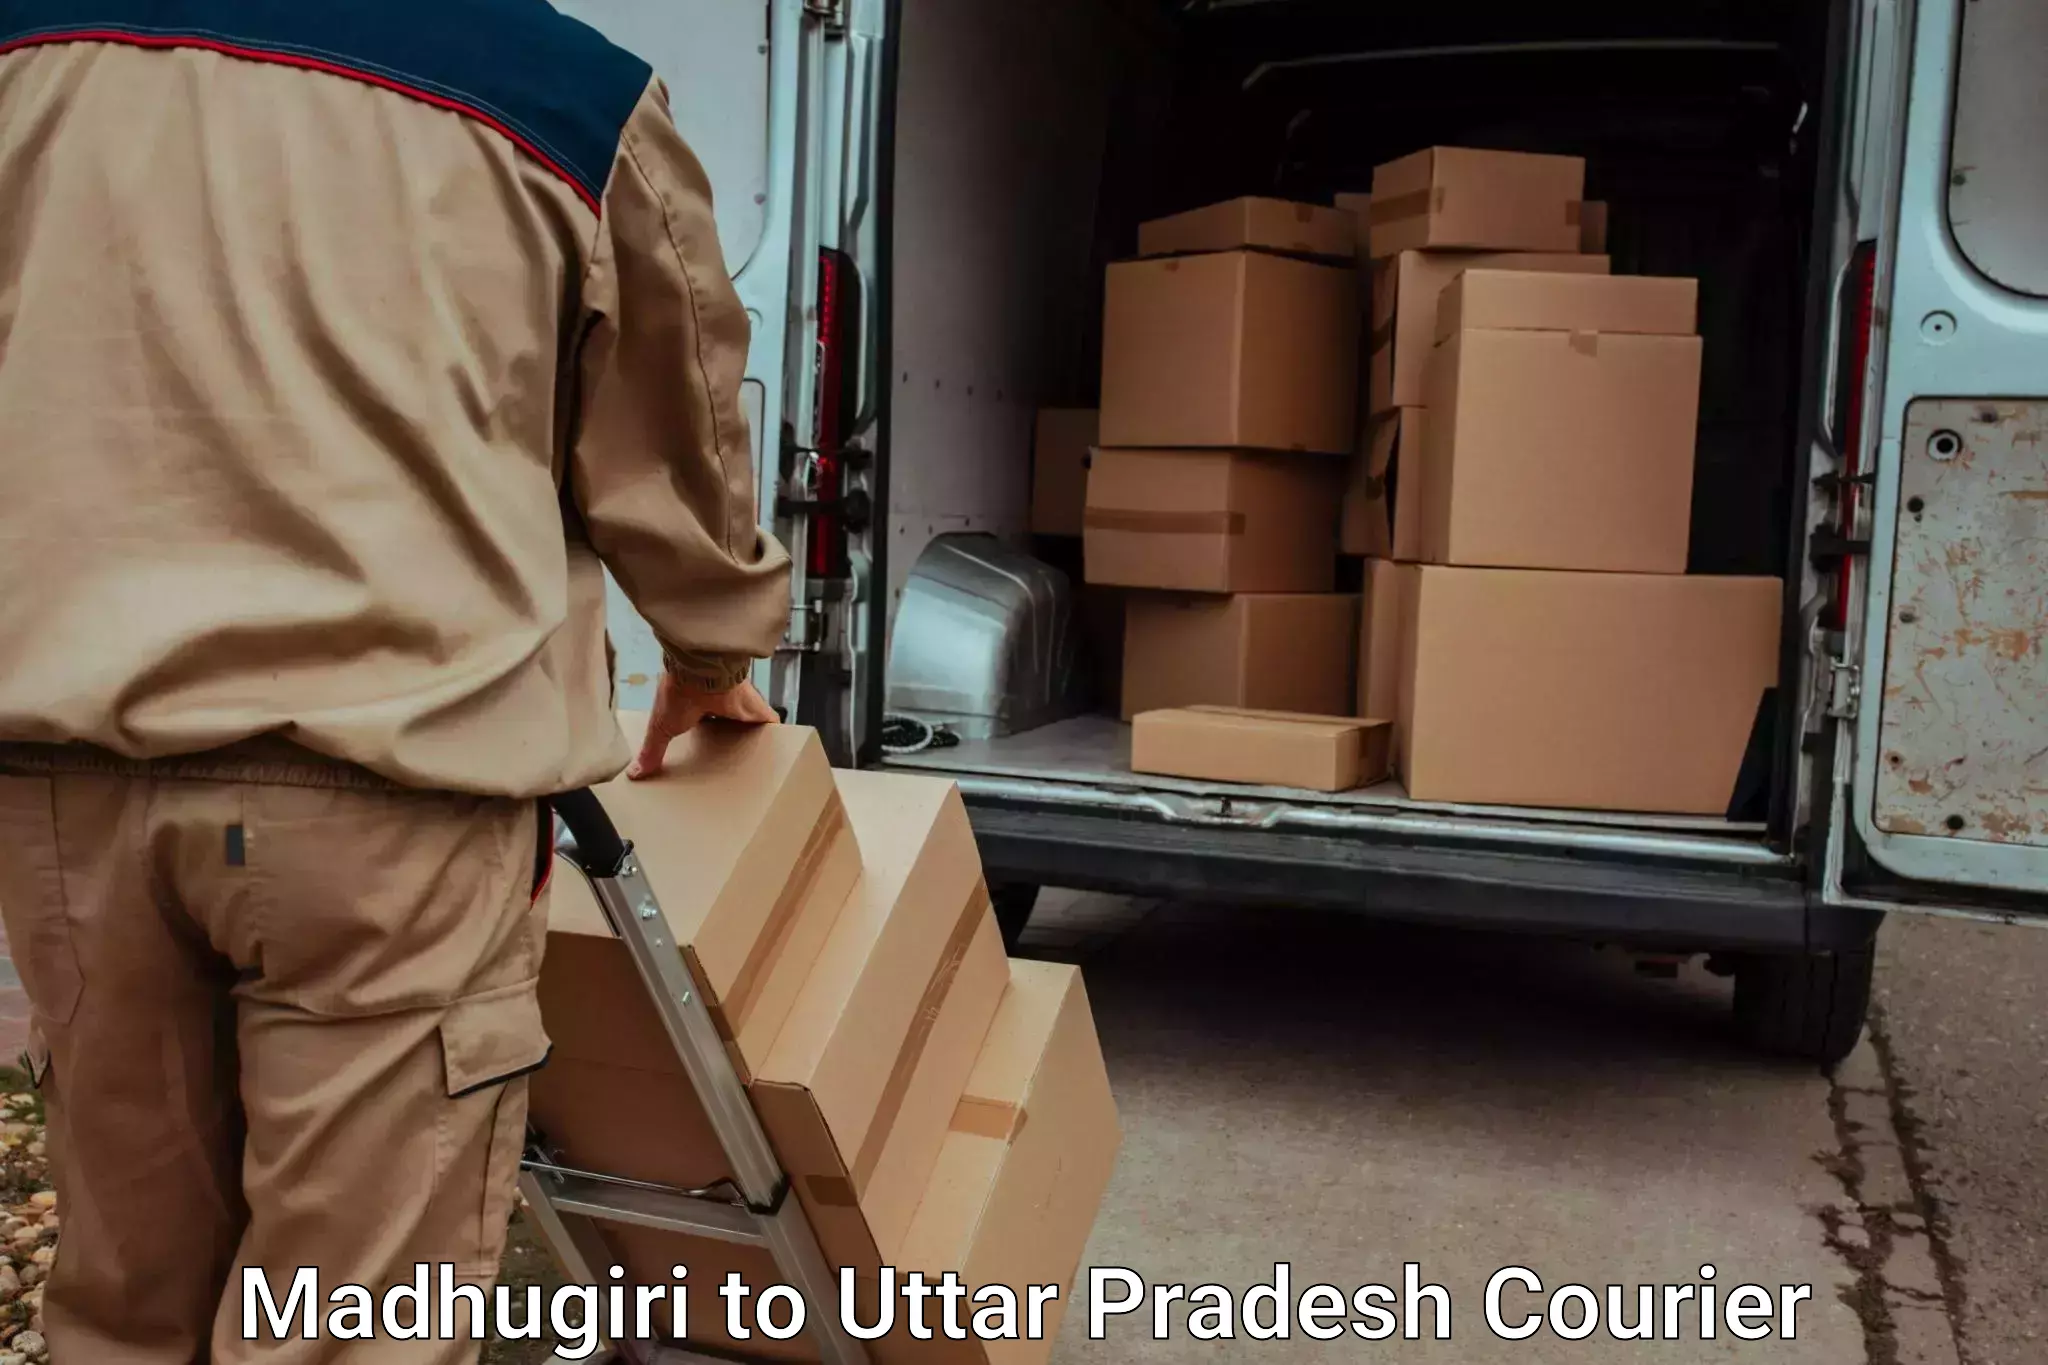 Professional moving company in Madhugiri to IIT Kanpur